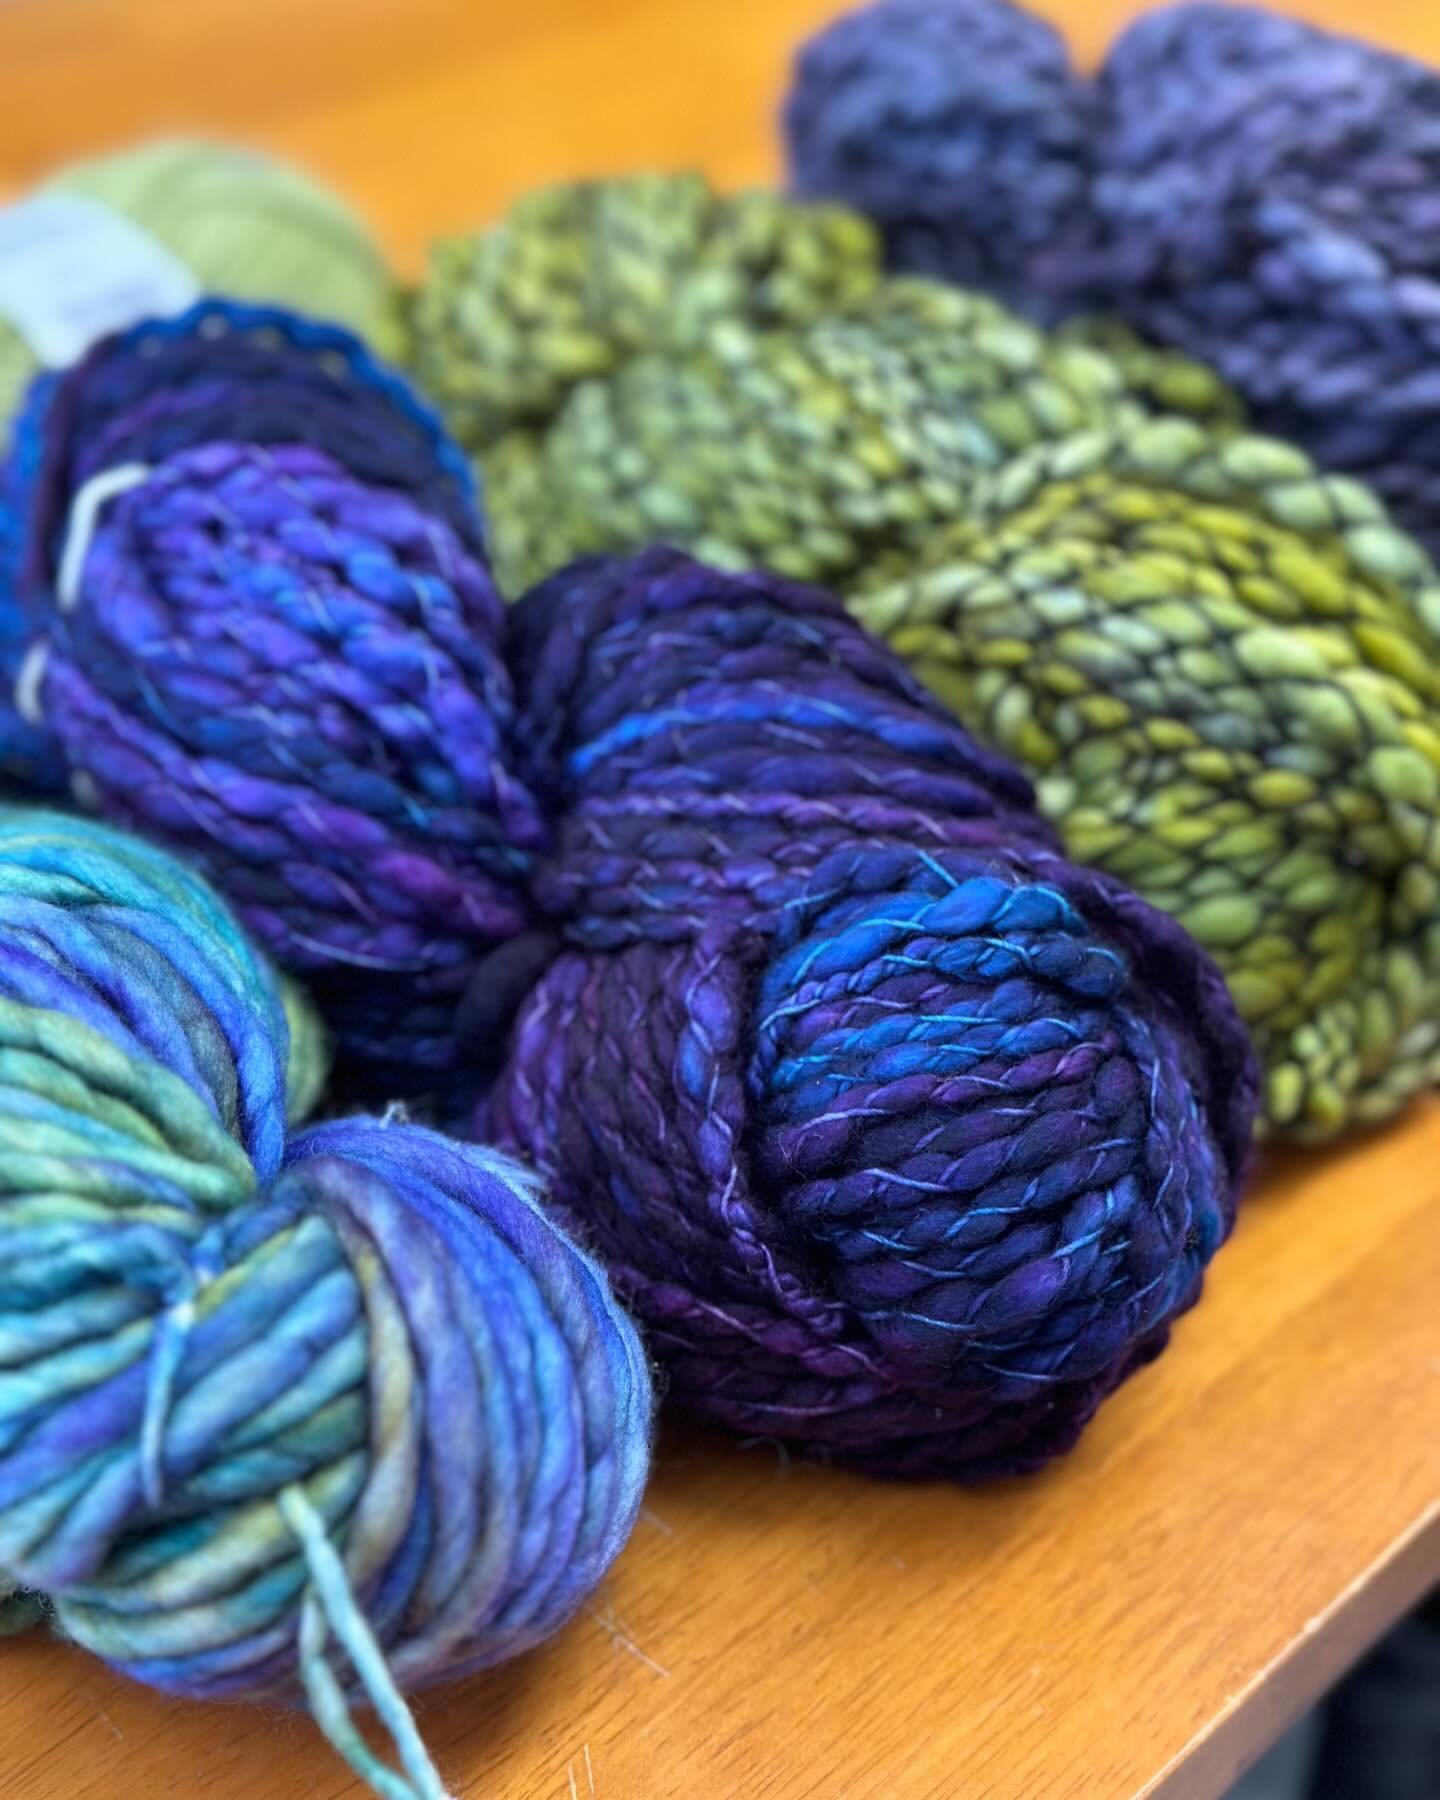 I&rsquo;m loving this palette that a customer picked out yesterday! Can&rsquo;t wait to see what they hook up! #rughooking #rughookingwool #rughookingyarn #rughookersofinstagram #rughookingsupplies #yarnlove #yarn #wool #rugmaking #punchneedle